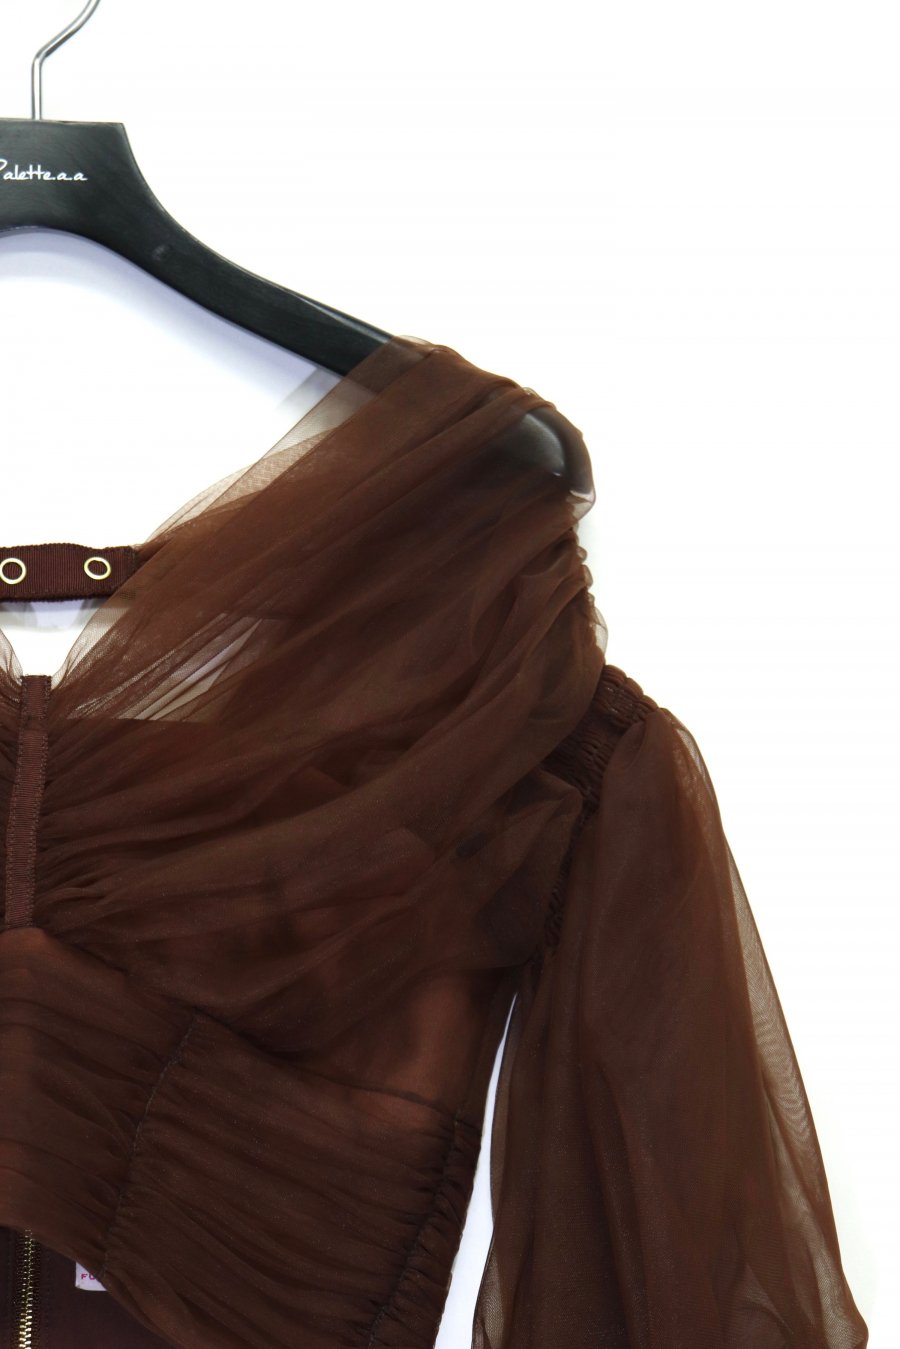 FETICO（フェティコ）のMUTTON SLEEVE TULLE BLOUSE BROWNの通販サイト